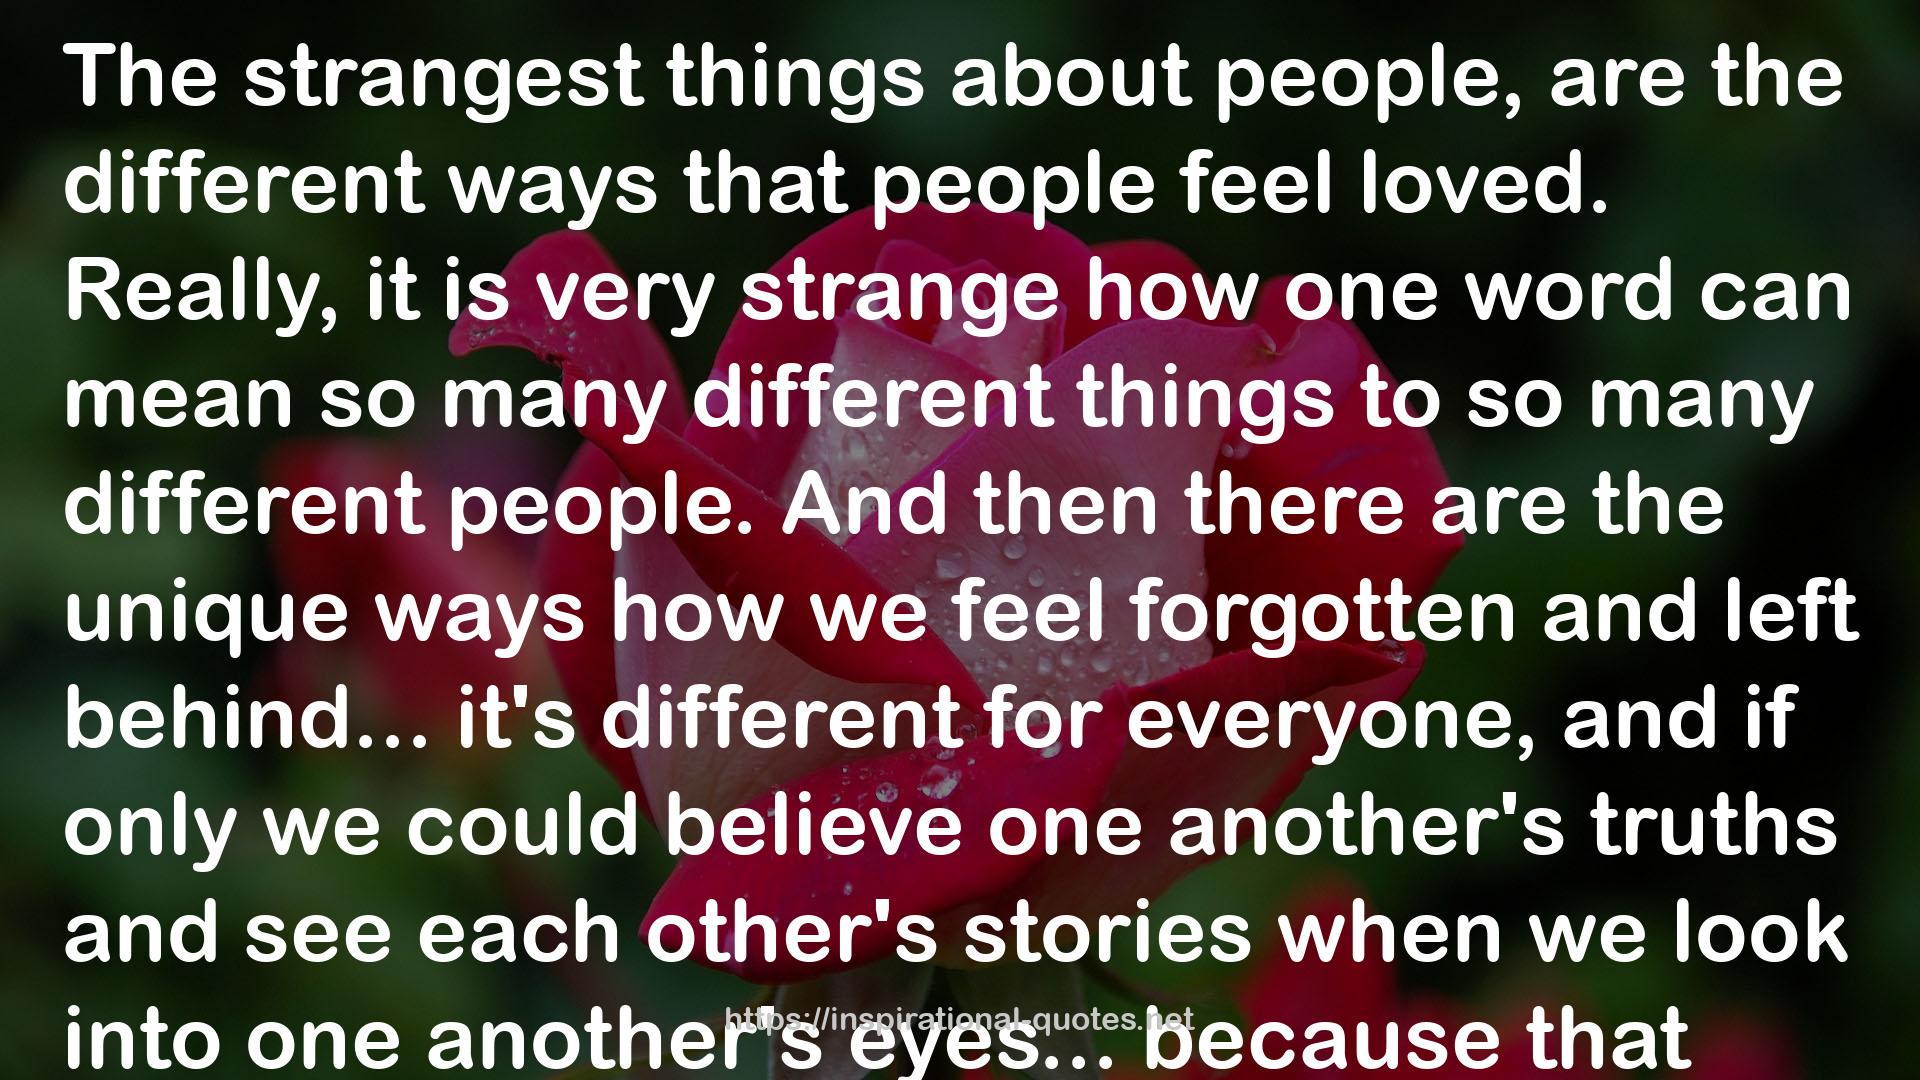 each other's stories  QUOTES